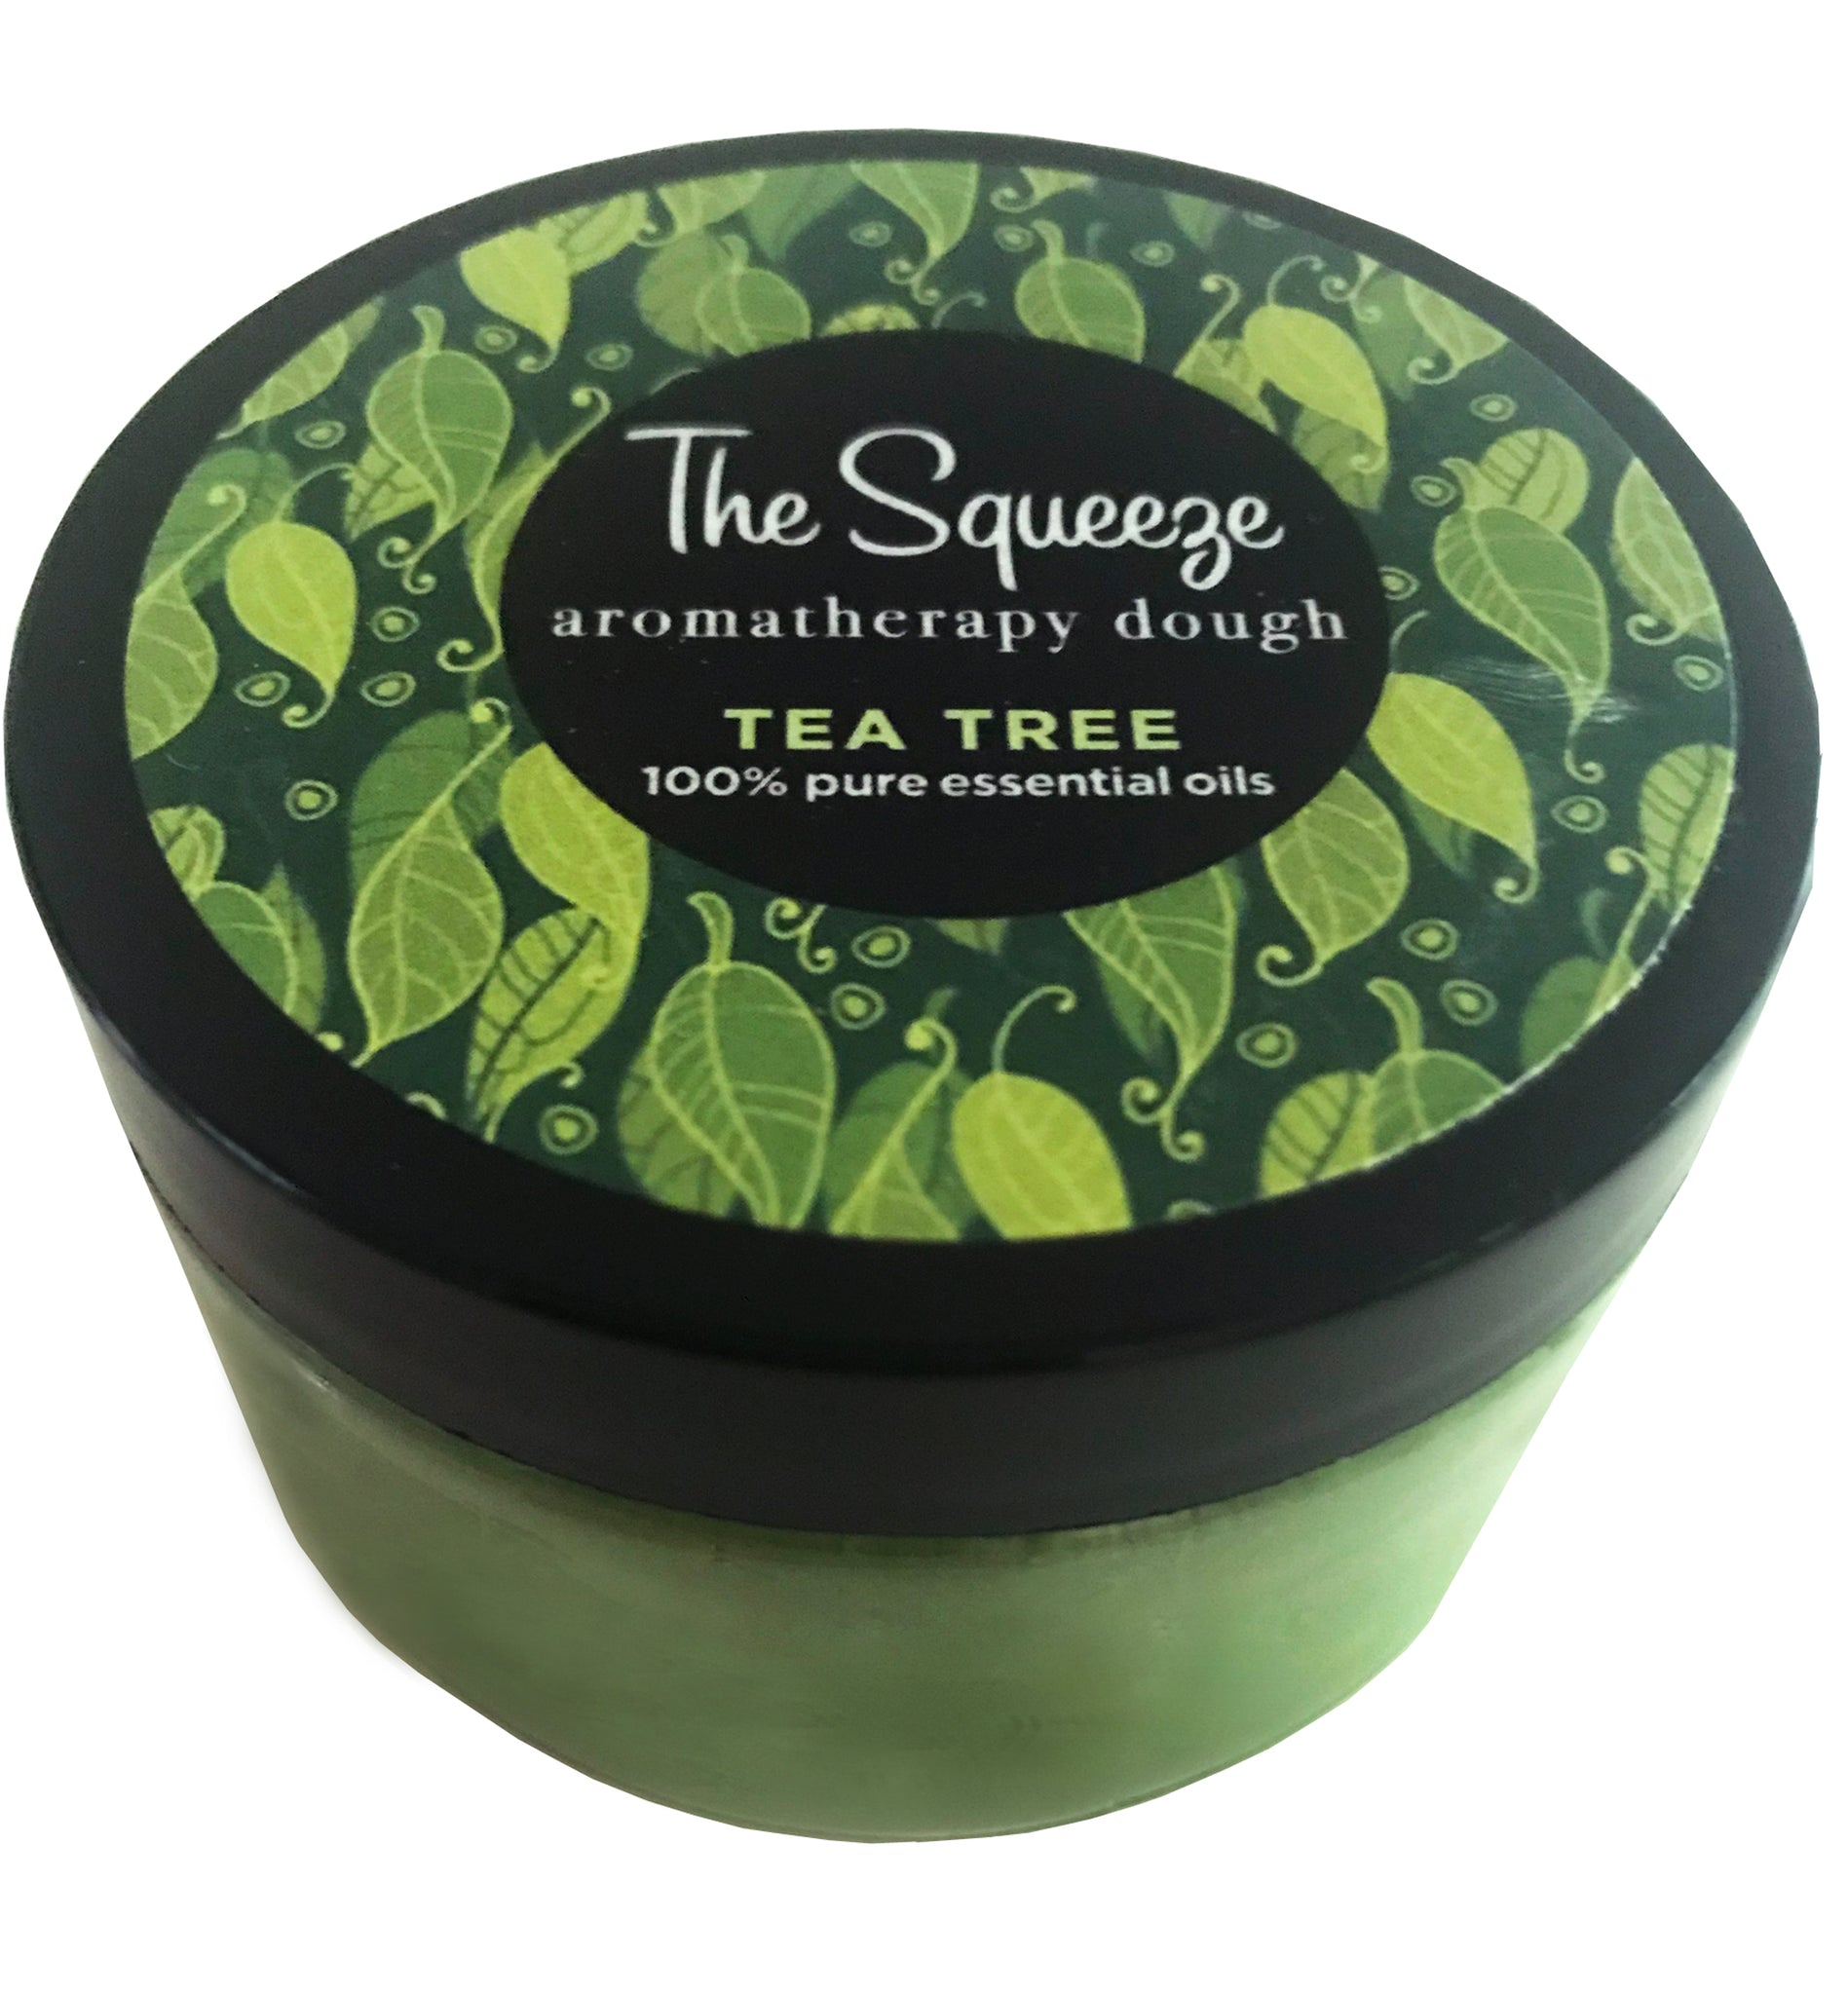 The Squeeze - Tea Tree 100% essential oil stress relief dough for self care, aromatherapy stress ball, stress relief FREE SHIPPING